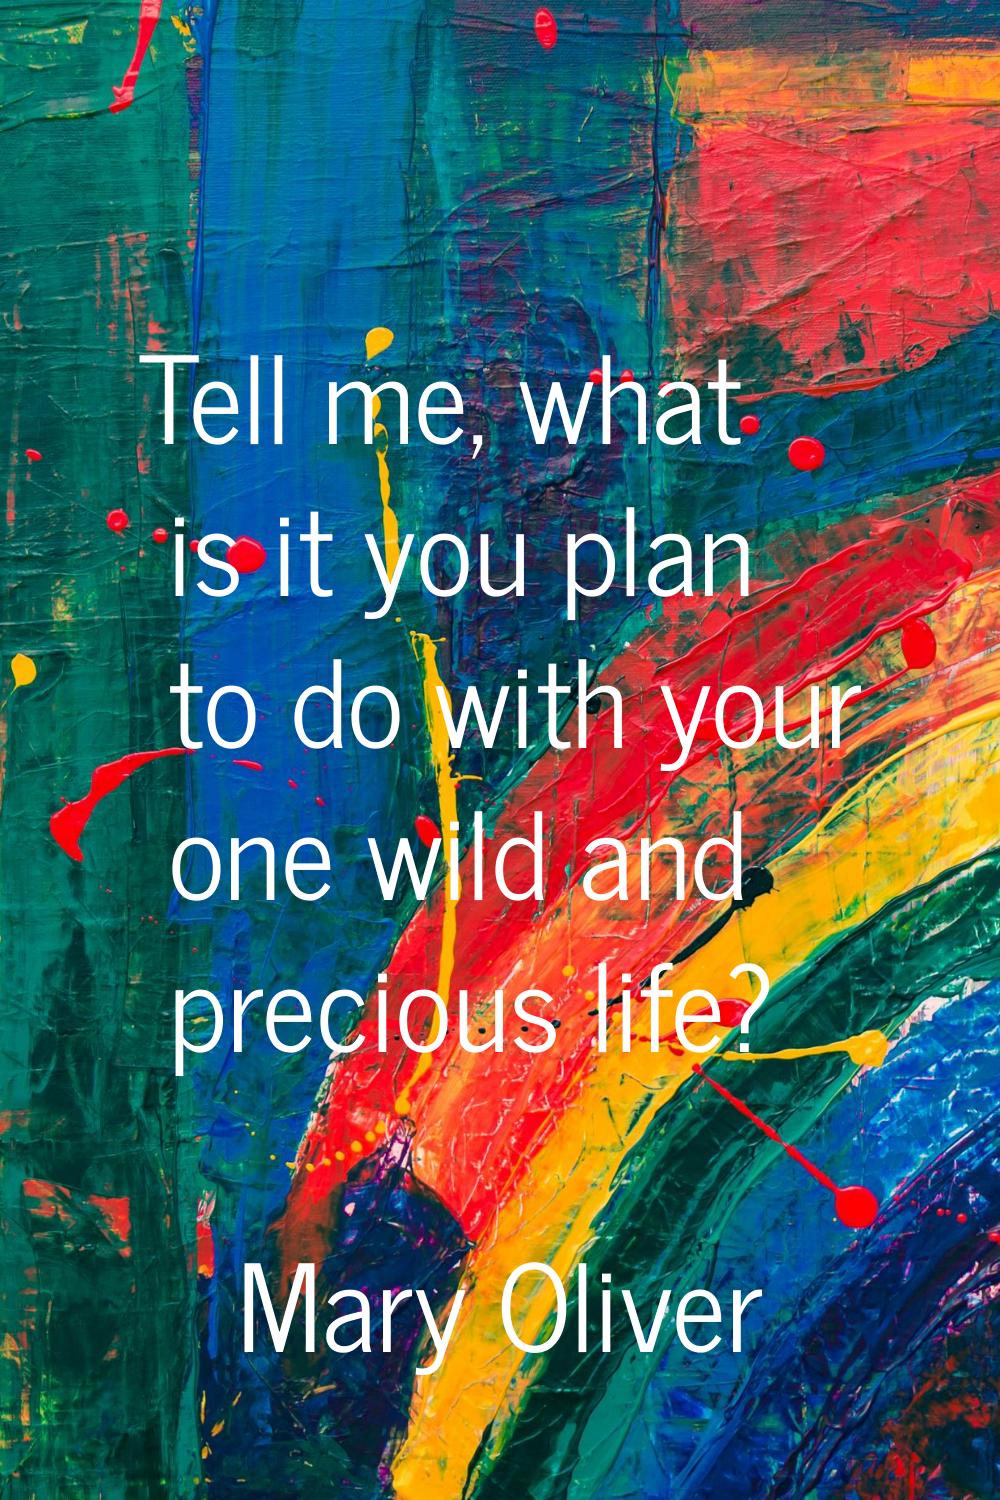 Tell me, what is it you plan to do with your one wild and precious life?